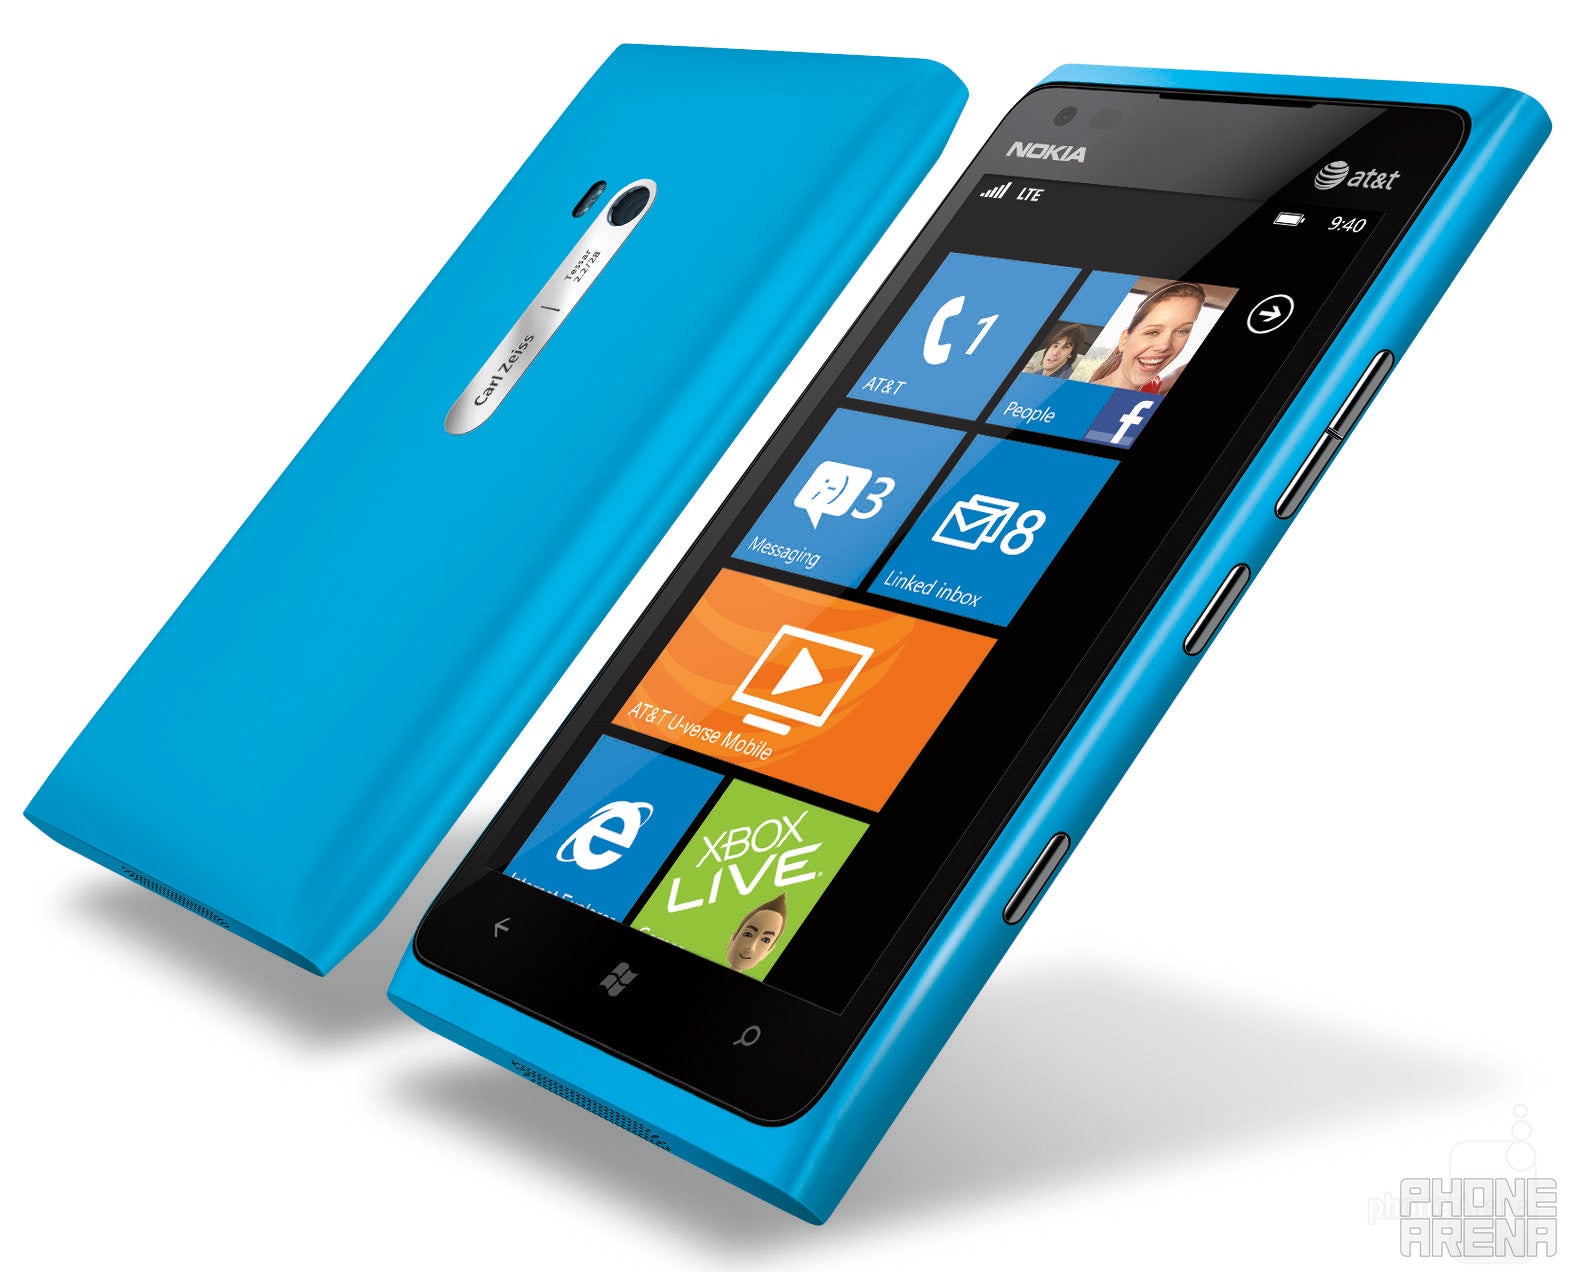 Lumia 900 - Can the Nokia Lumia 900 reinvent the Nokia brand to what it once was?